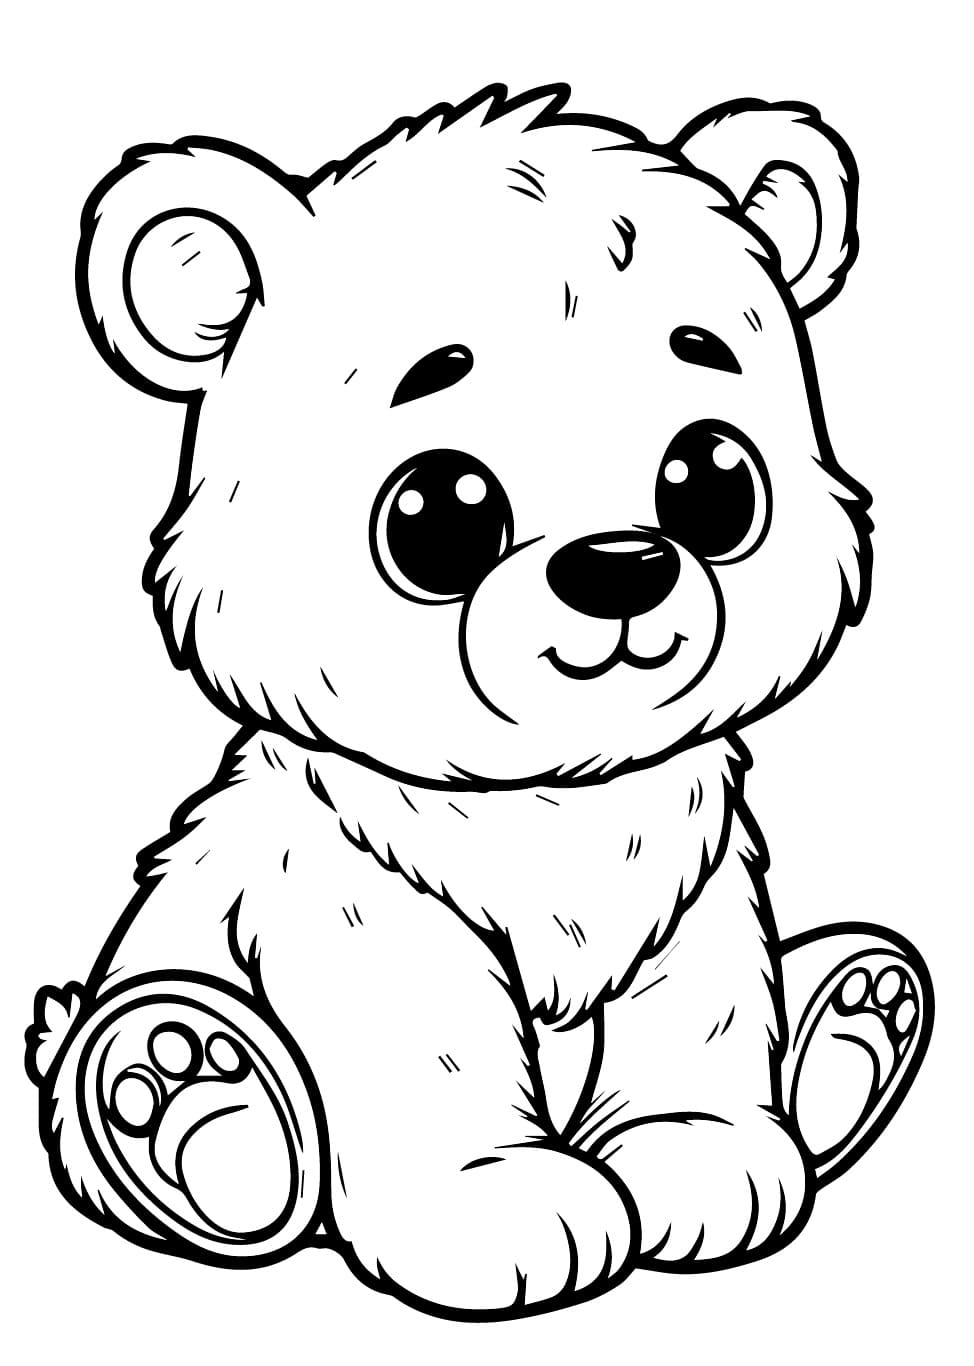 Petit Ourson coloring page